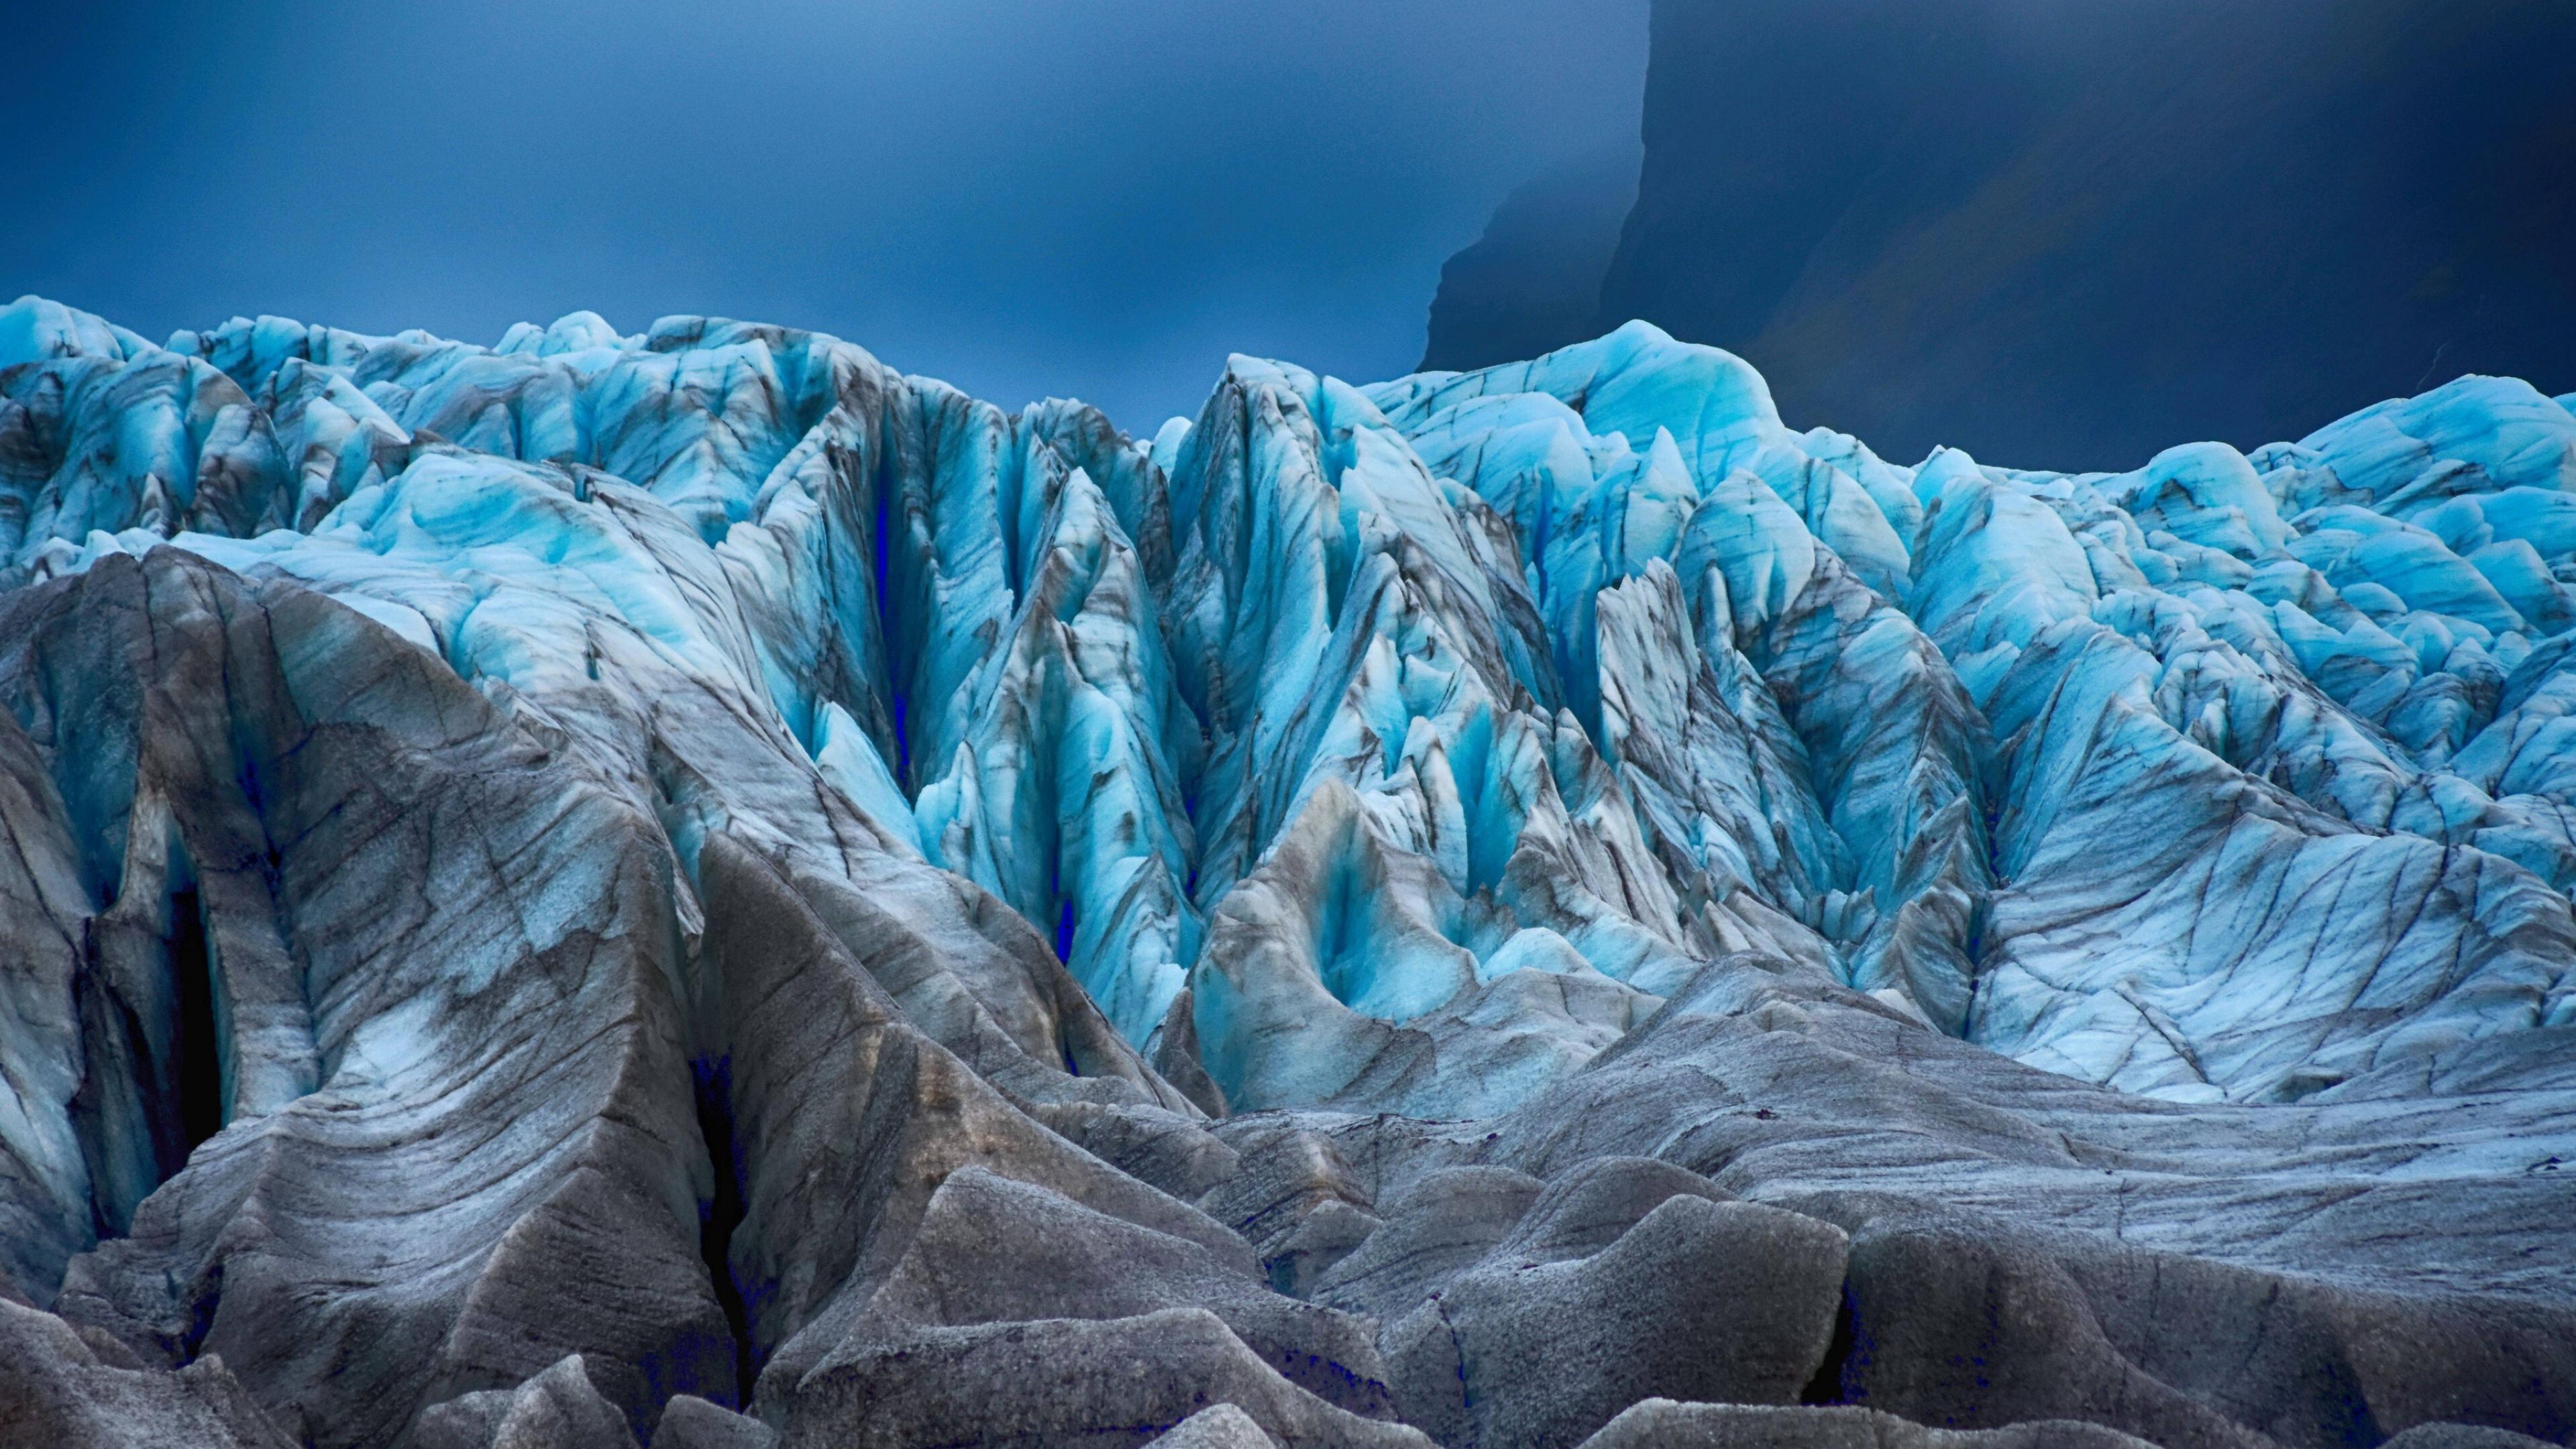 Glacier: Nature, An ice mass that slowly flows and deforms under stresses induced by its weight. 3840x2160 4K Wallpaper.